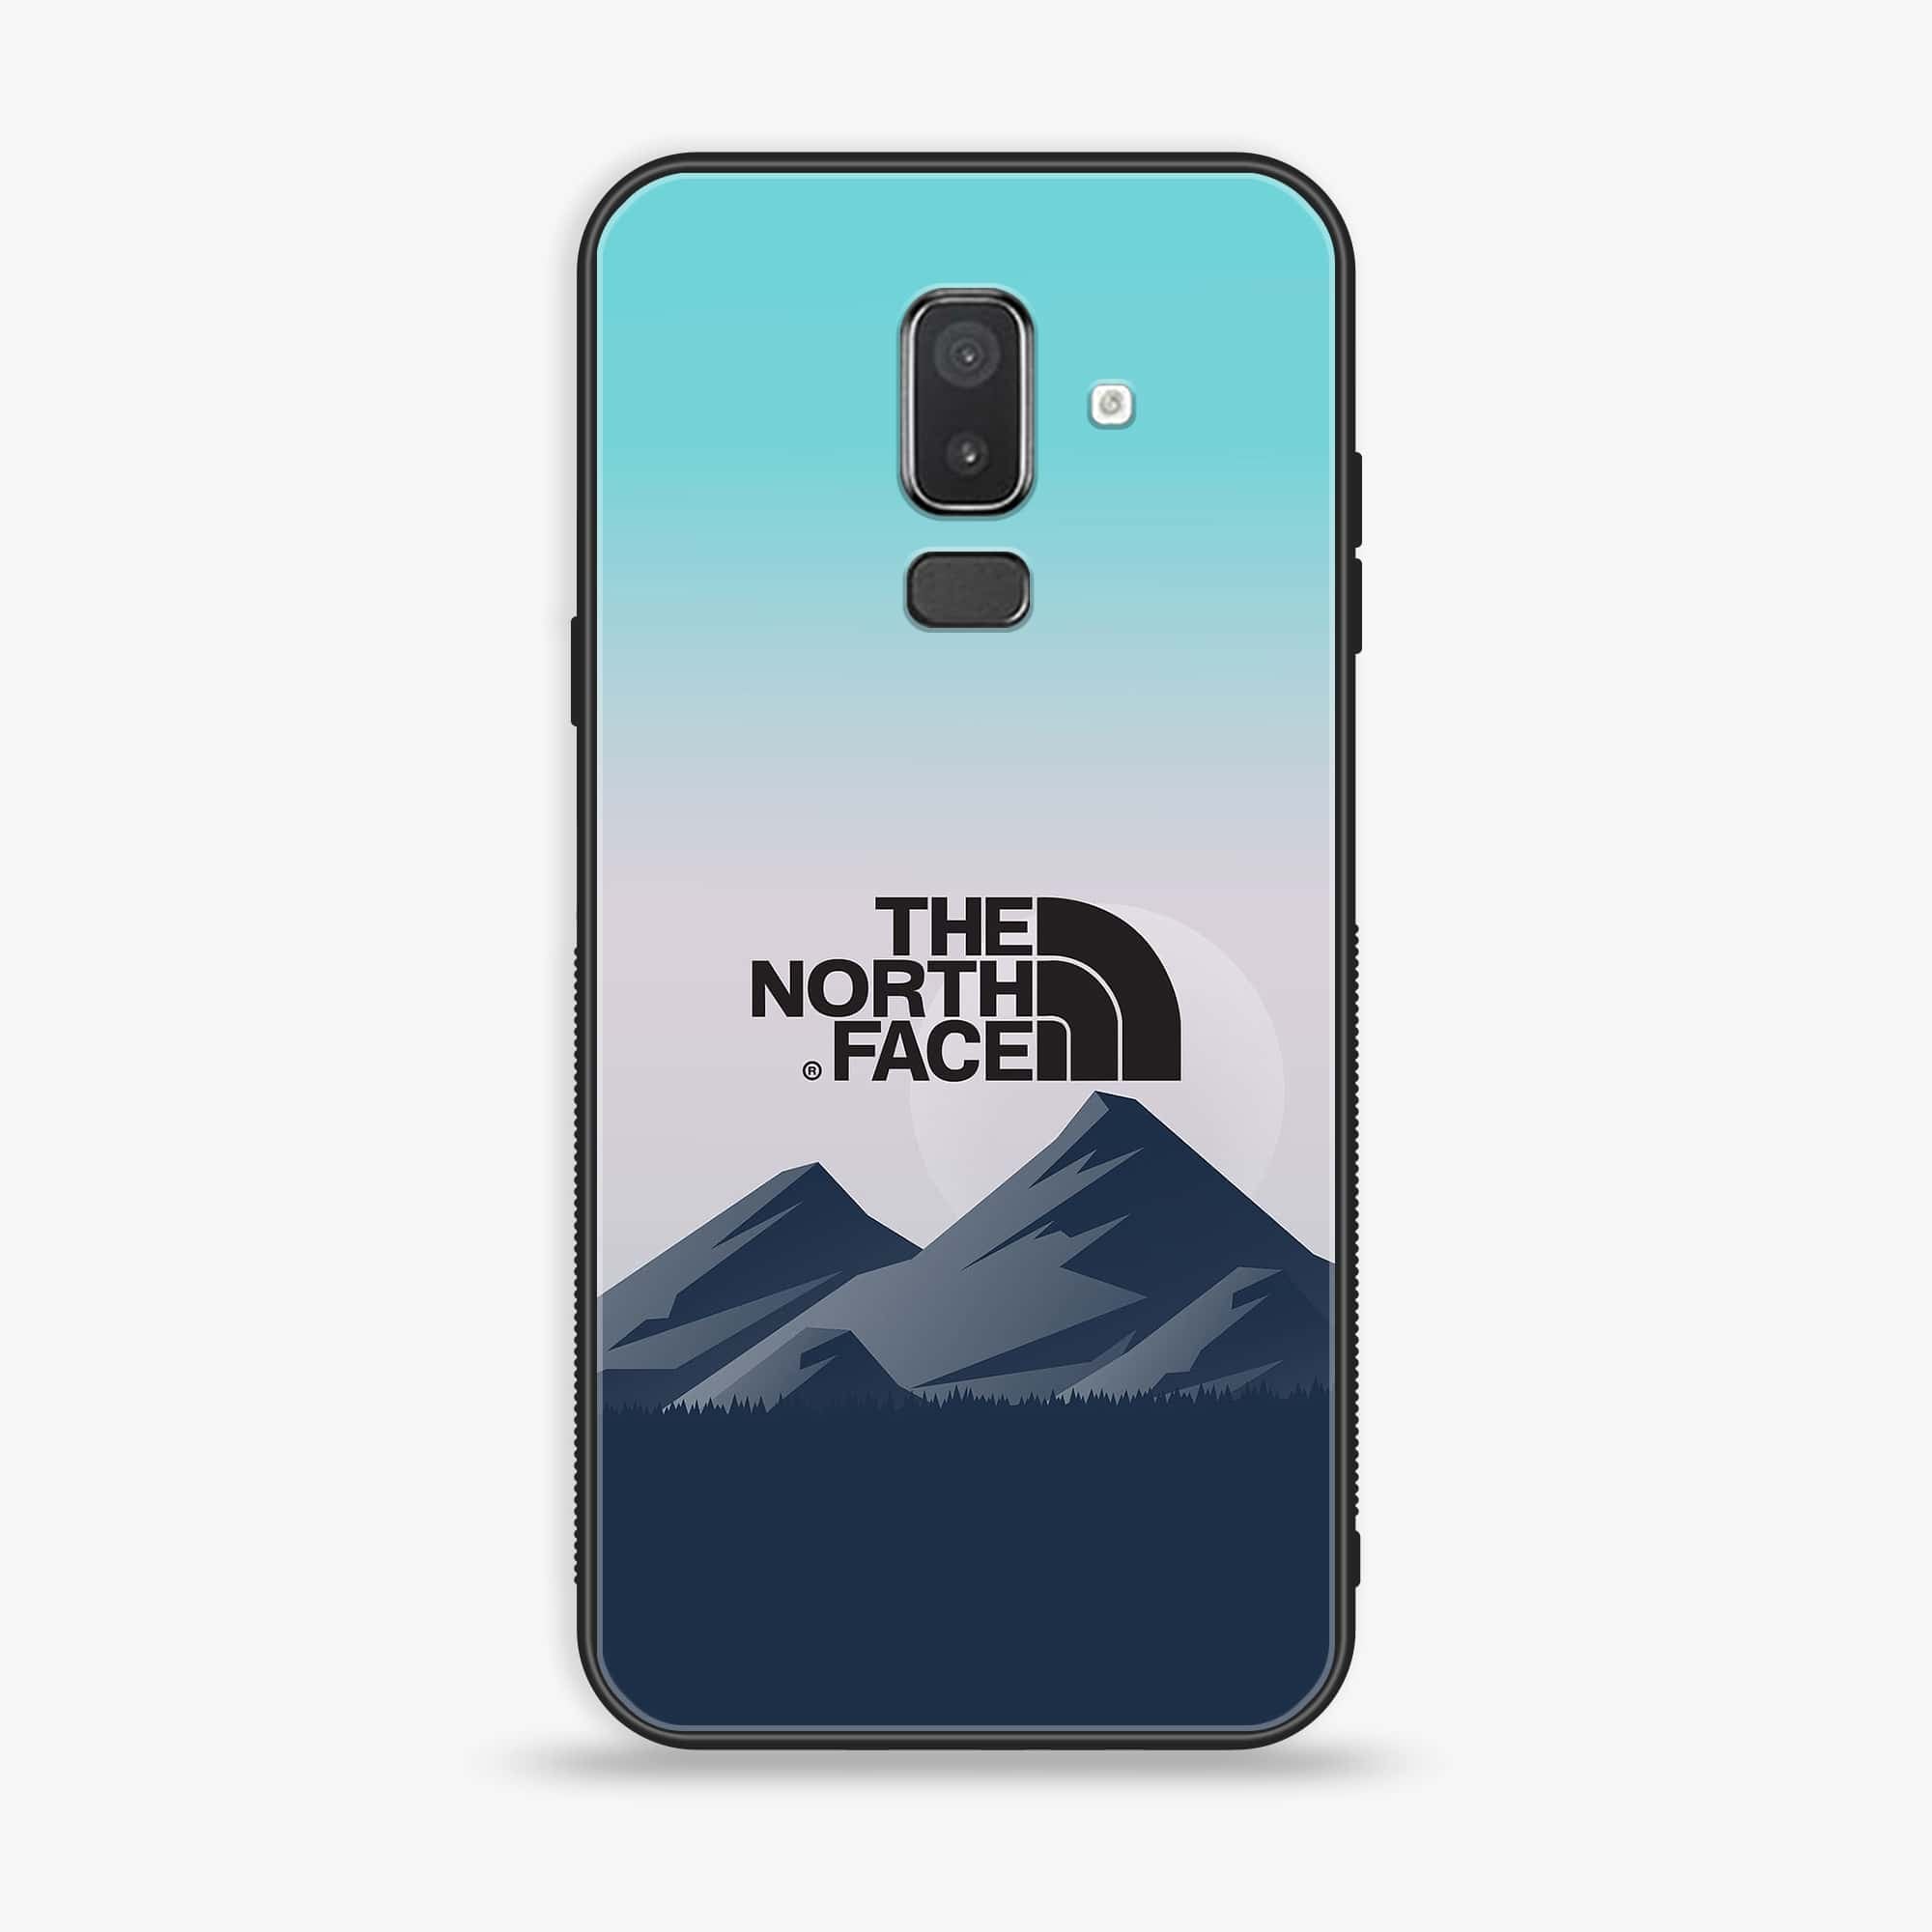 Samsung Galaxy J8 2018 - The North Face Series - Premium Printed Glass soft Bumper shock Proof Case